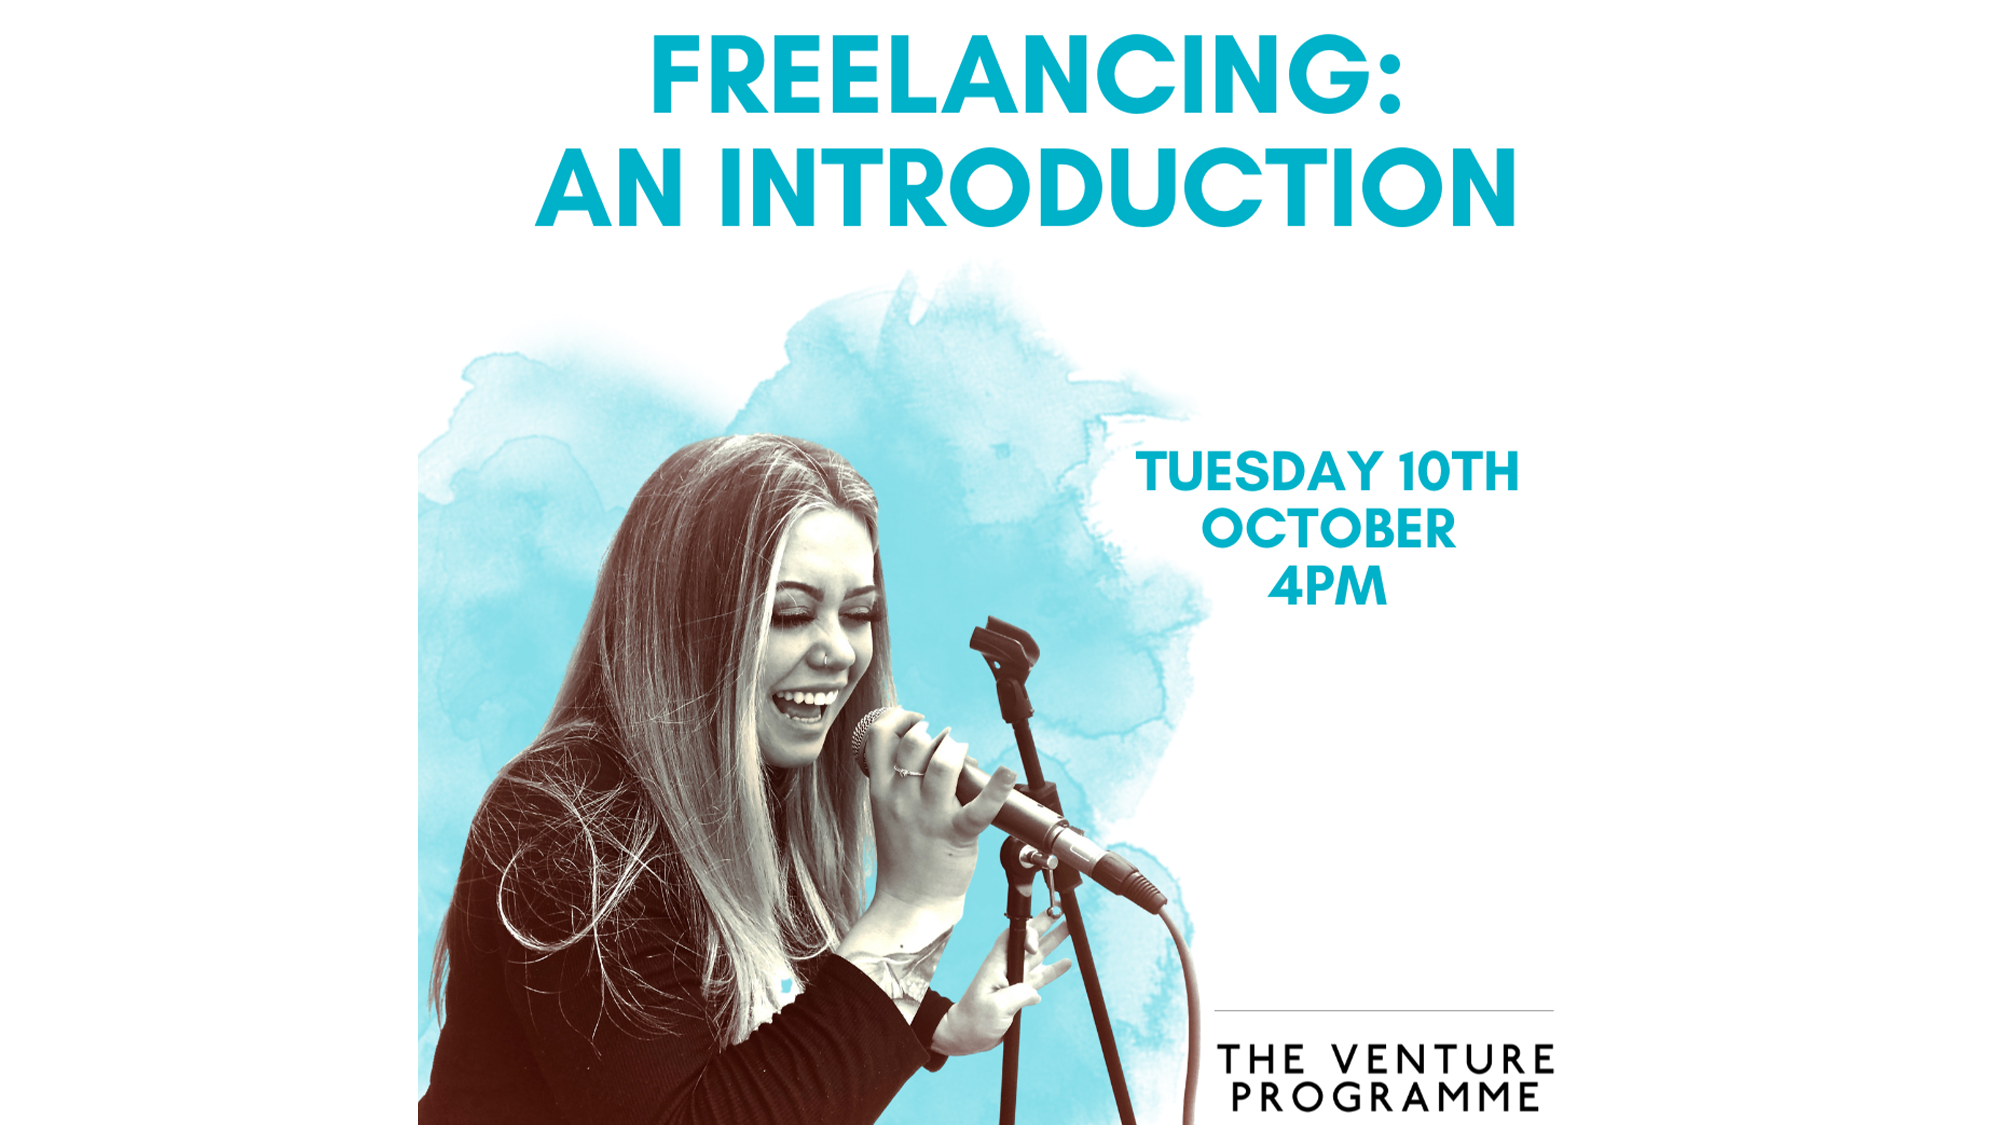 Venture Programme: Freelancing: An Introduction